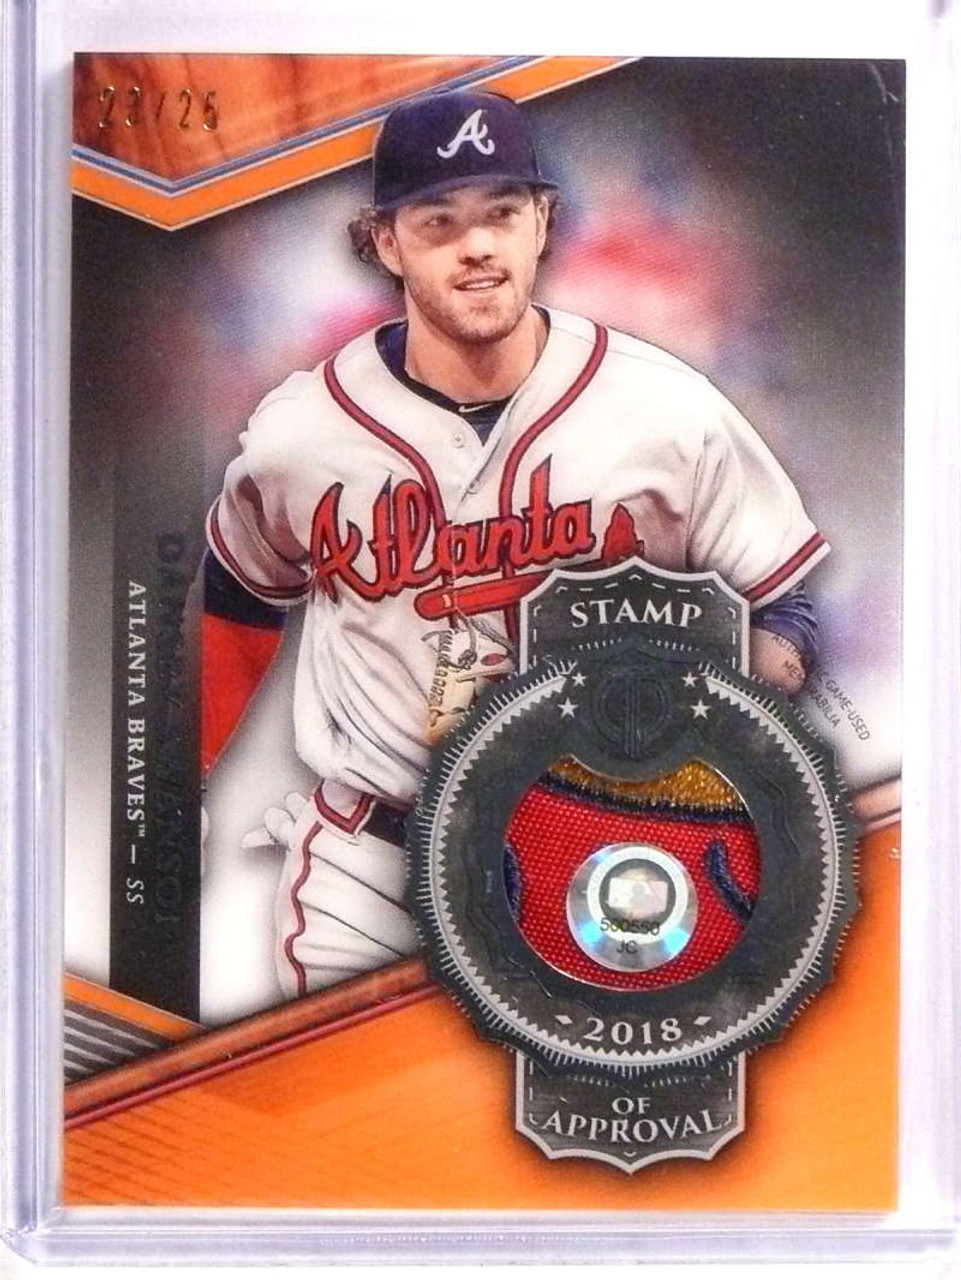 2018 Topps Tribute Stamp Orange Dansby Swanson 3 color patch #D23